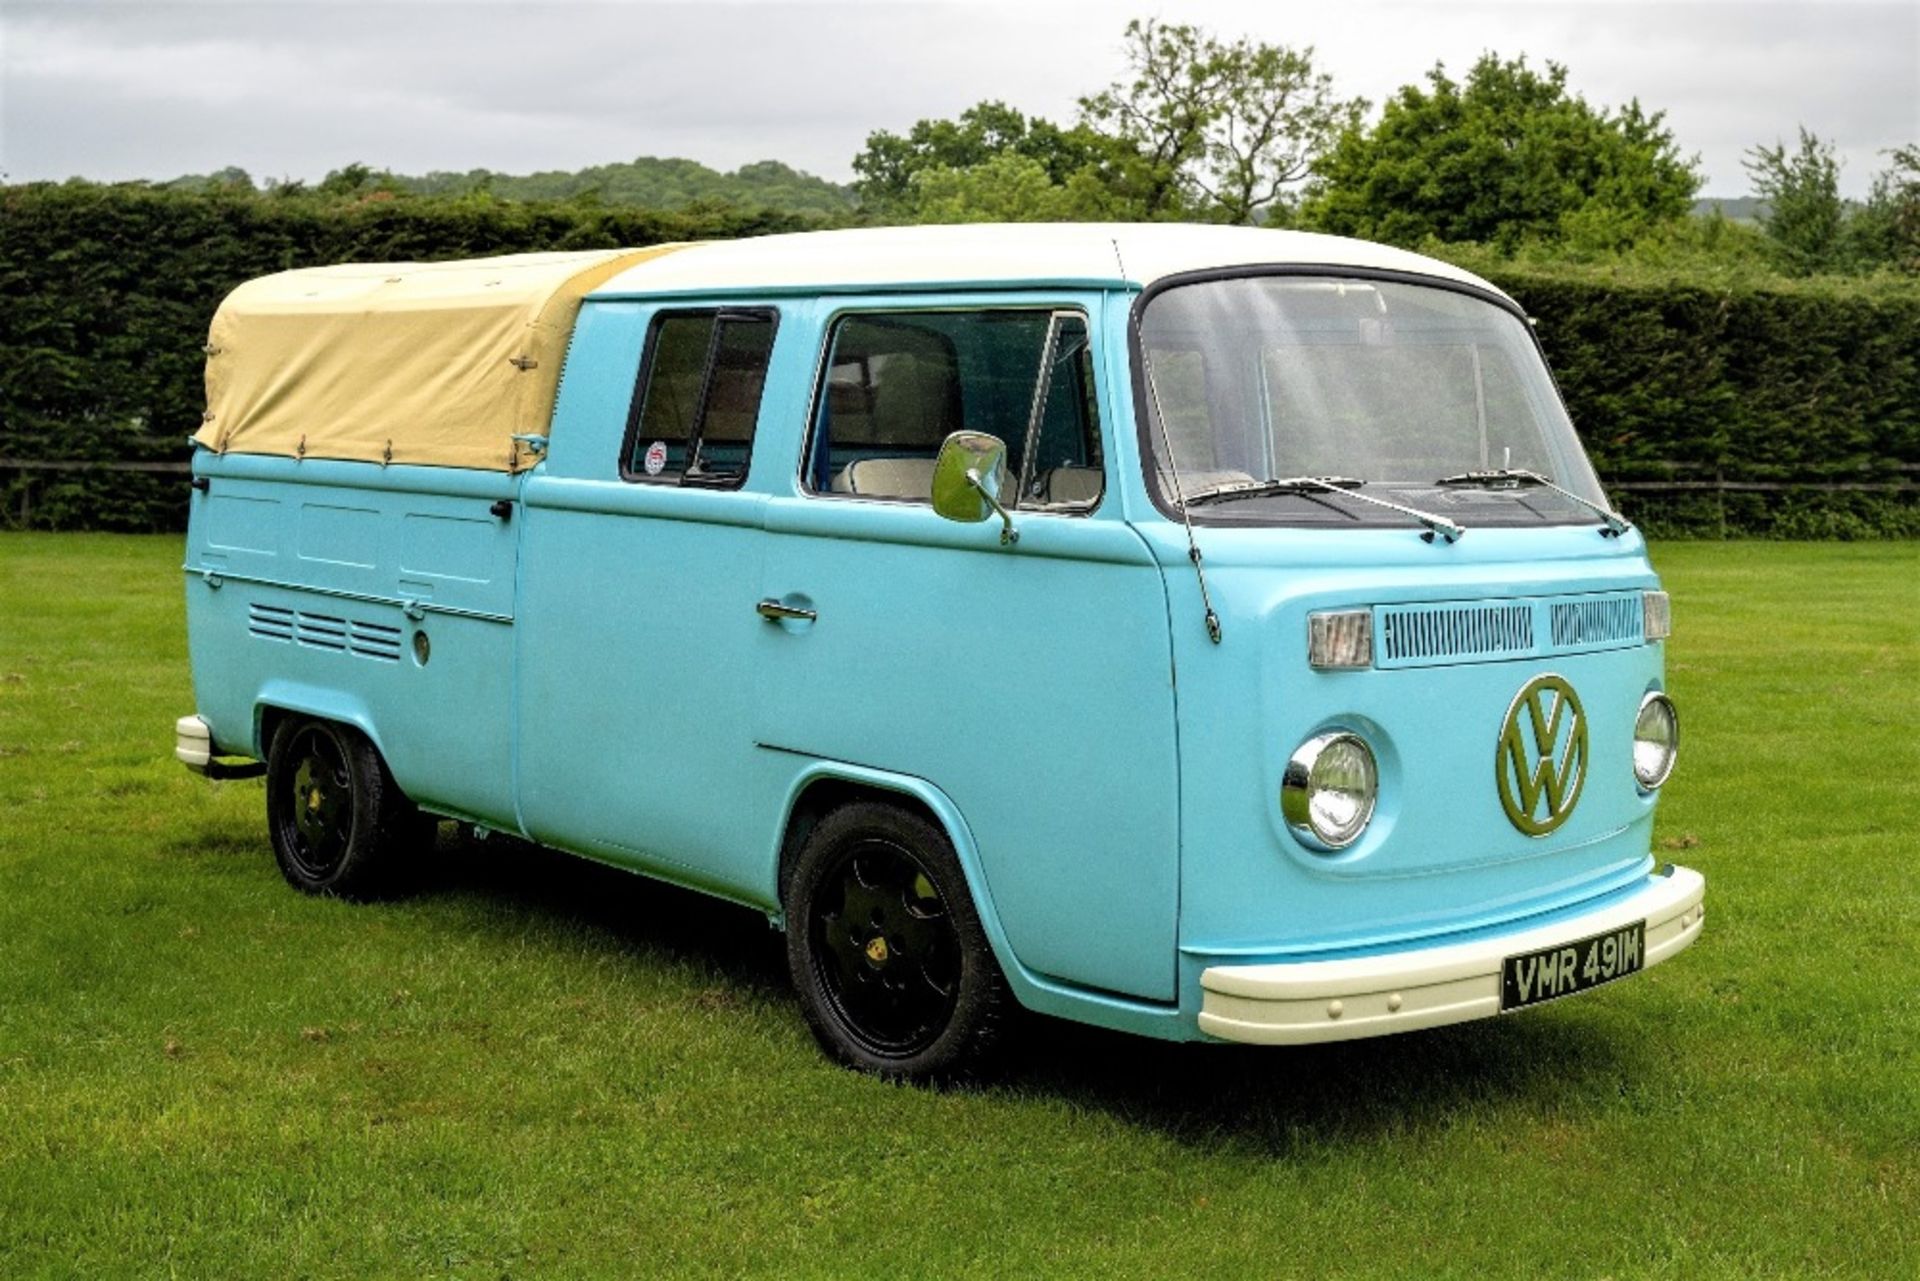 1974 VOLKSWAGEN TYPE 2 DOUBLE-CAB PICKUP Registration Number: VMR 491M Chassis Number: 2642-126- - Image 2 of 20